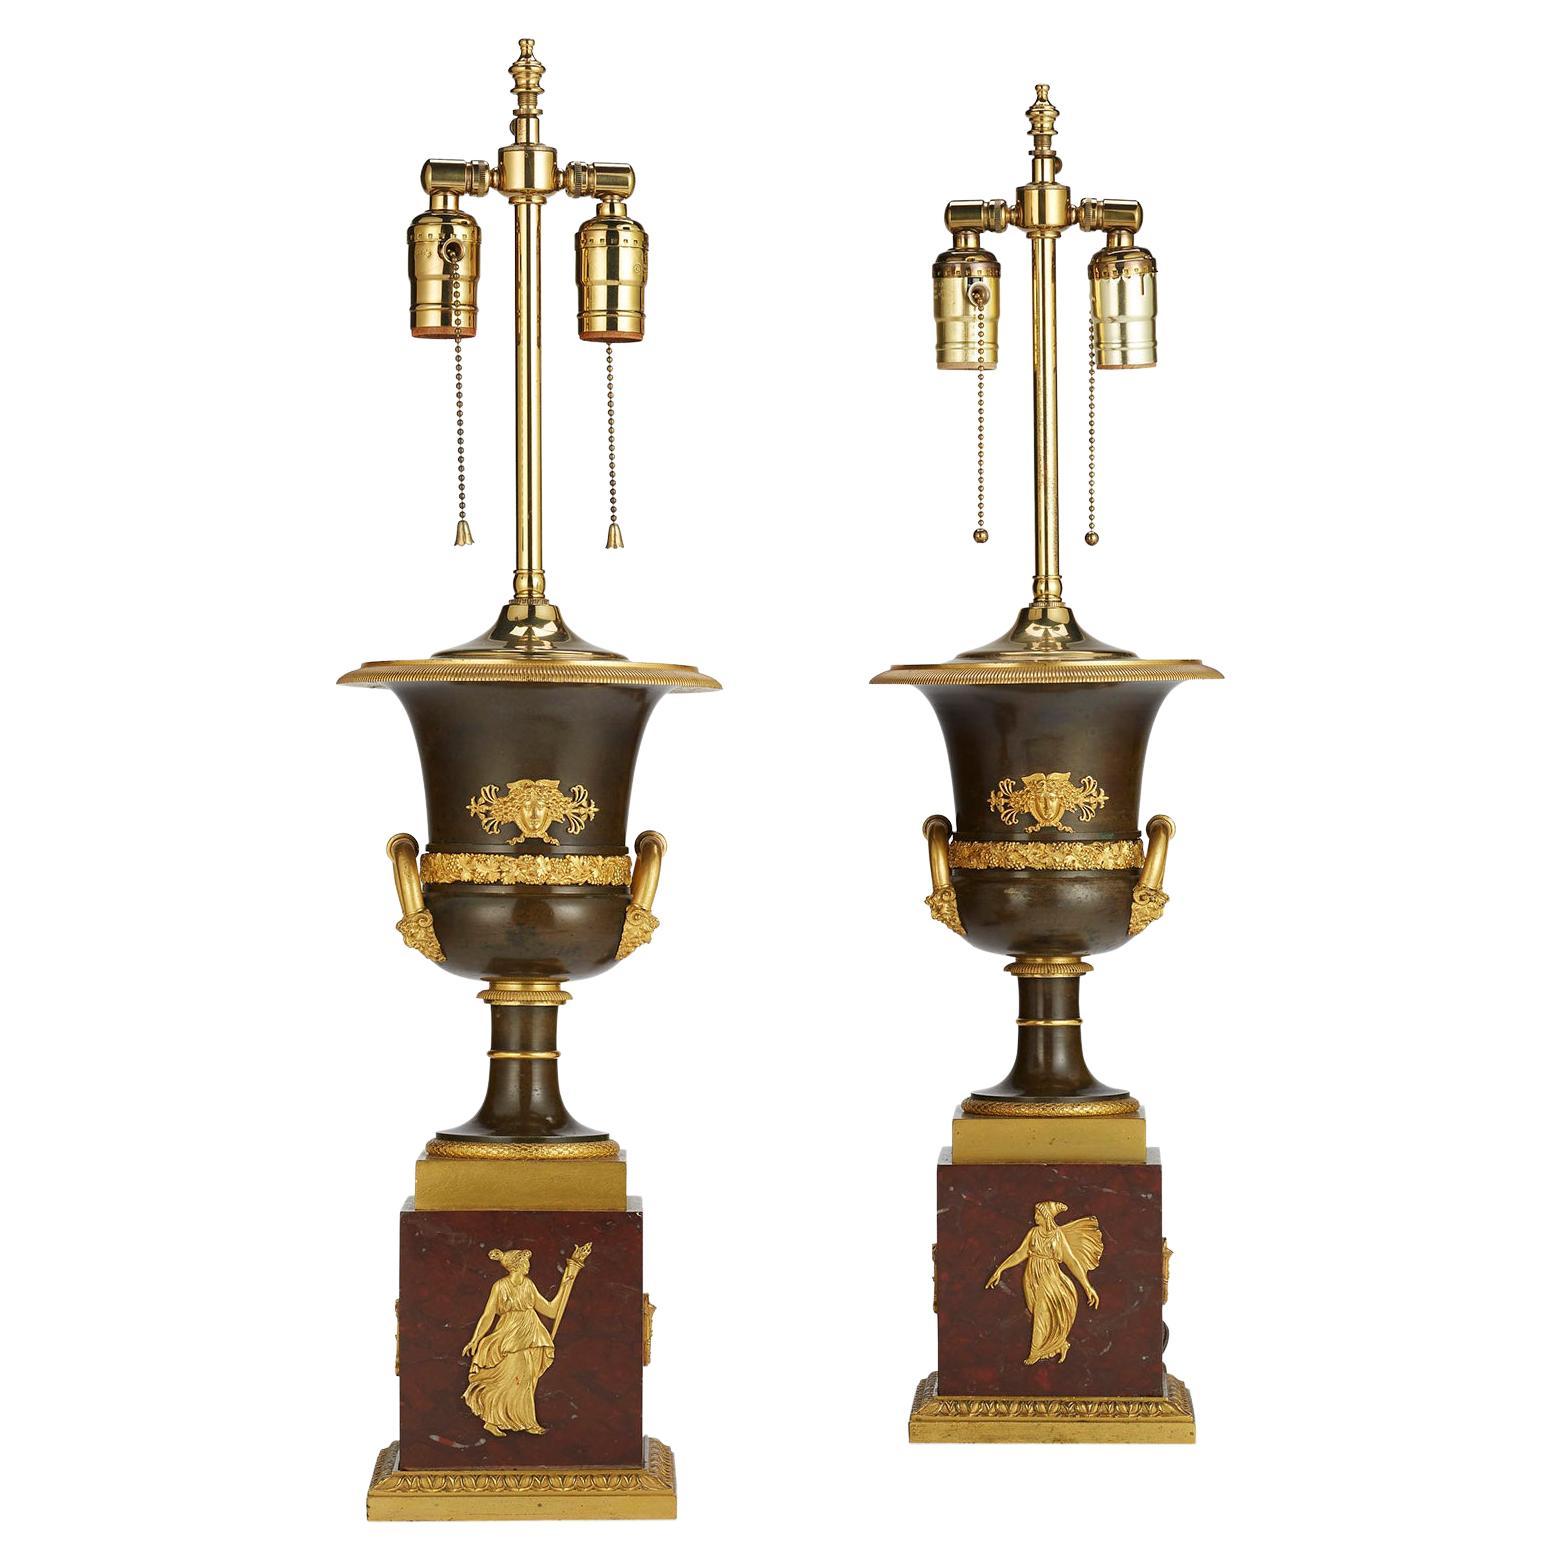 Pair French 19th Century Napoleon III Empire Style Gilt-Bronze Urn Table Lamps For Sale